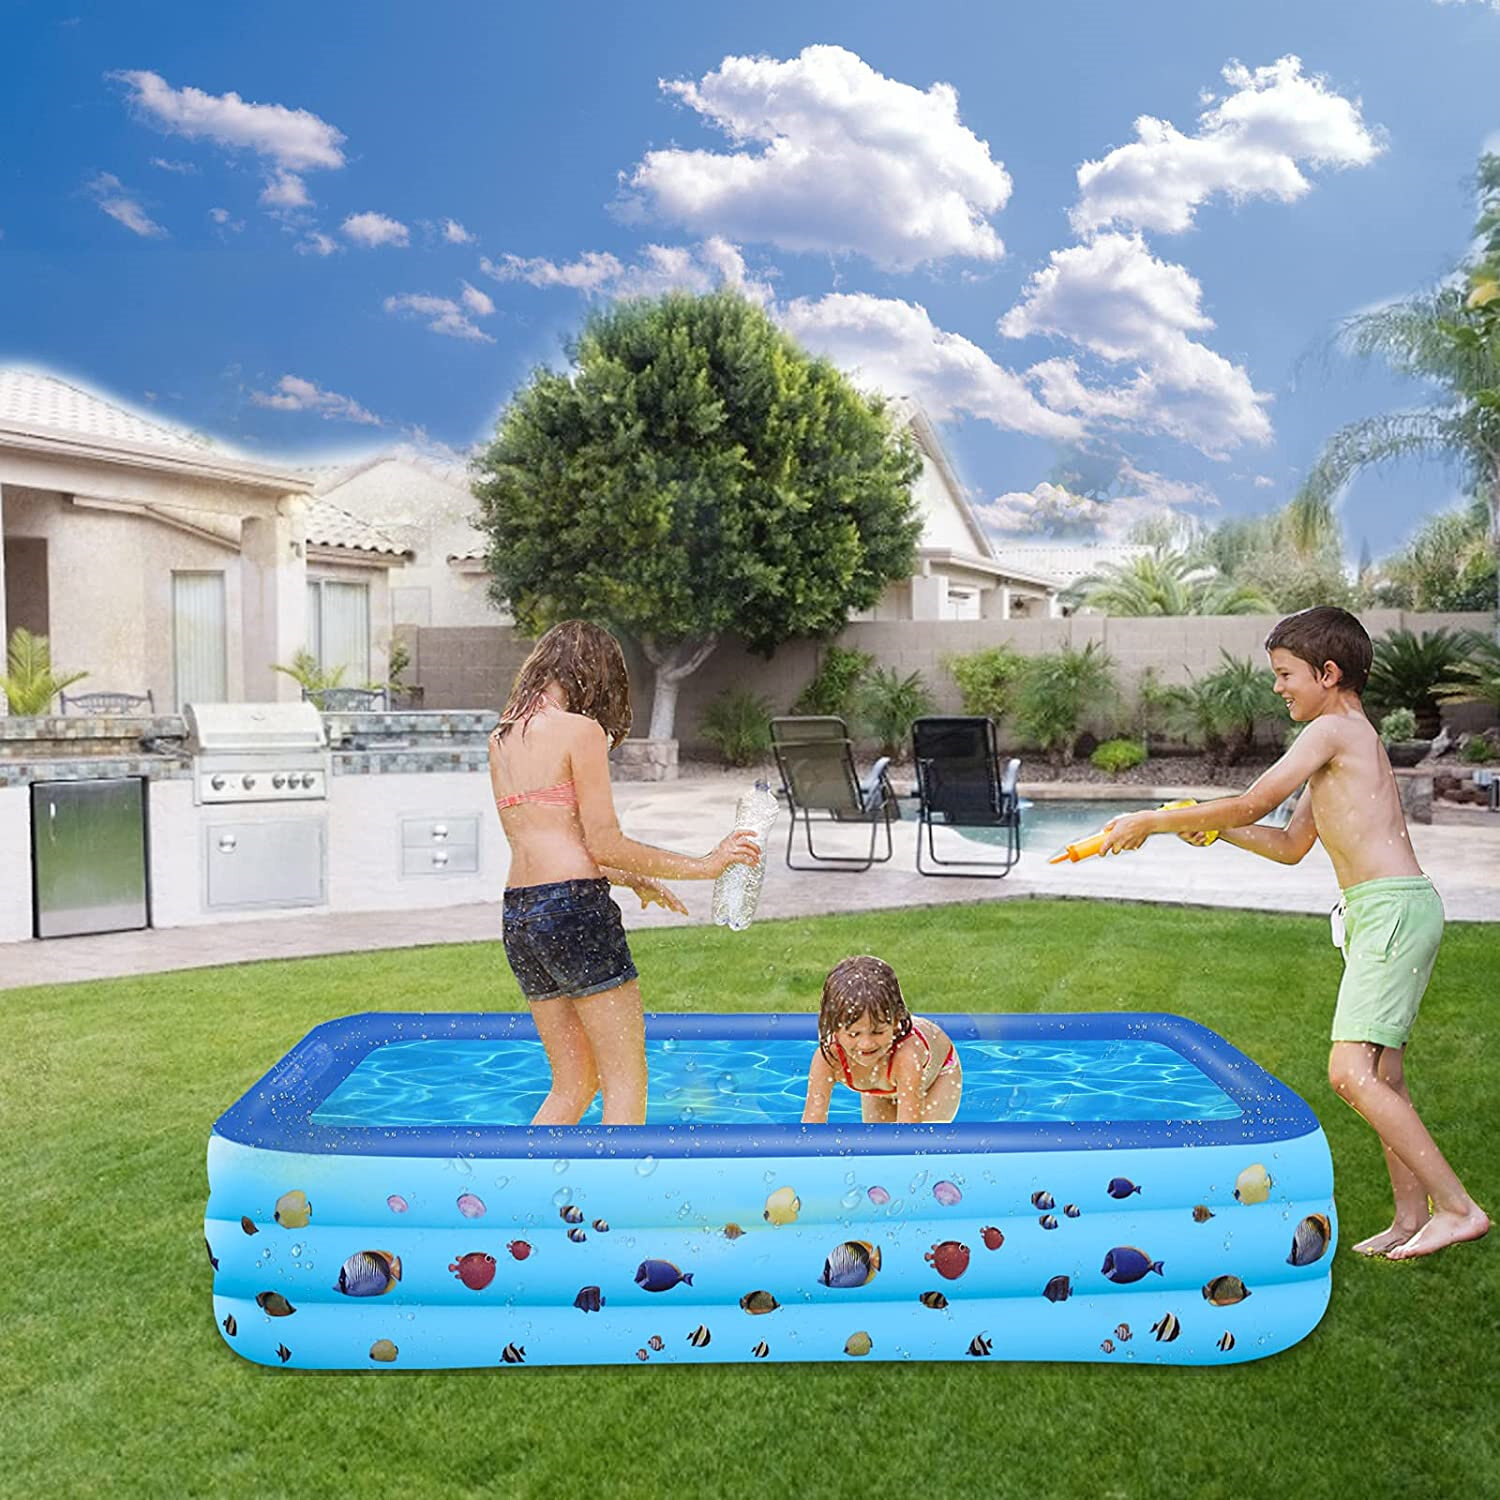 Large Paddling Garden Pool Kid Fun Inflatable Family Swimming Patio Outdoor Seat 